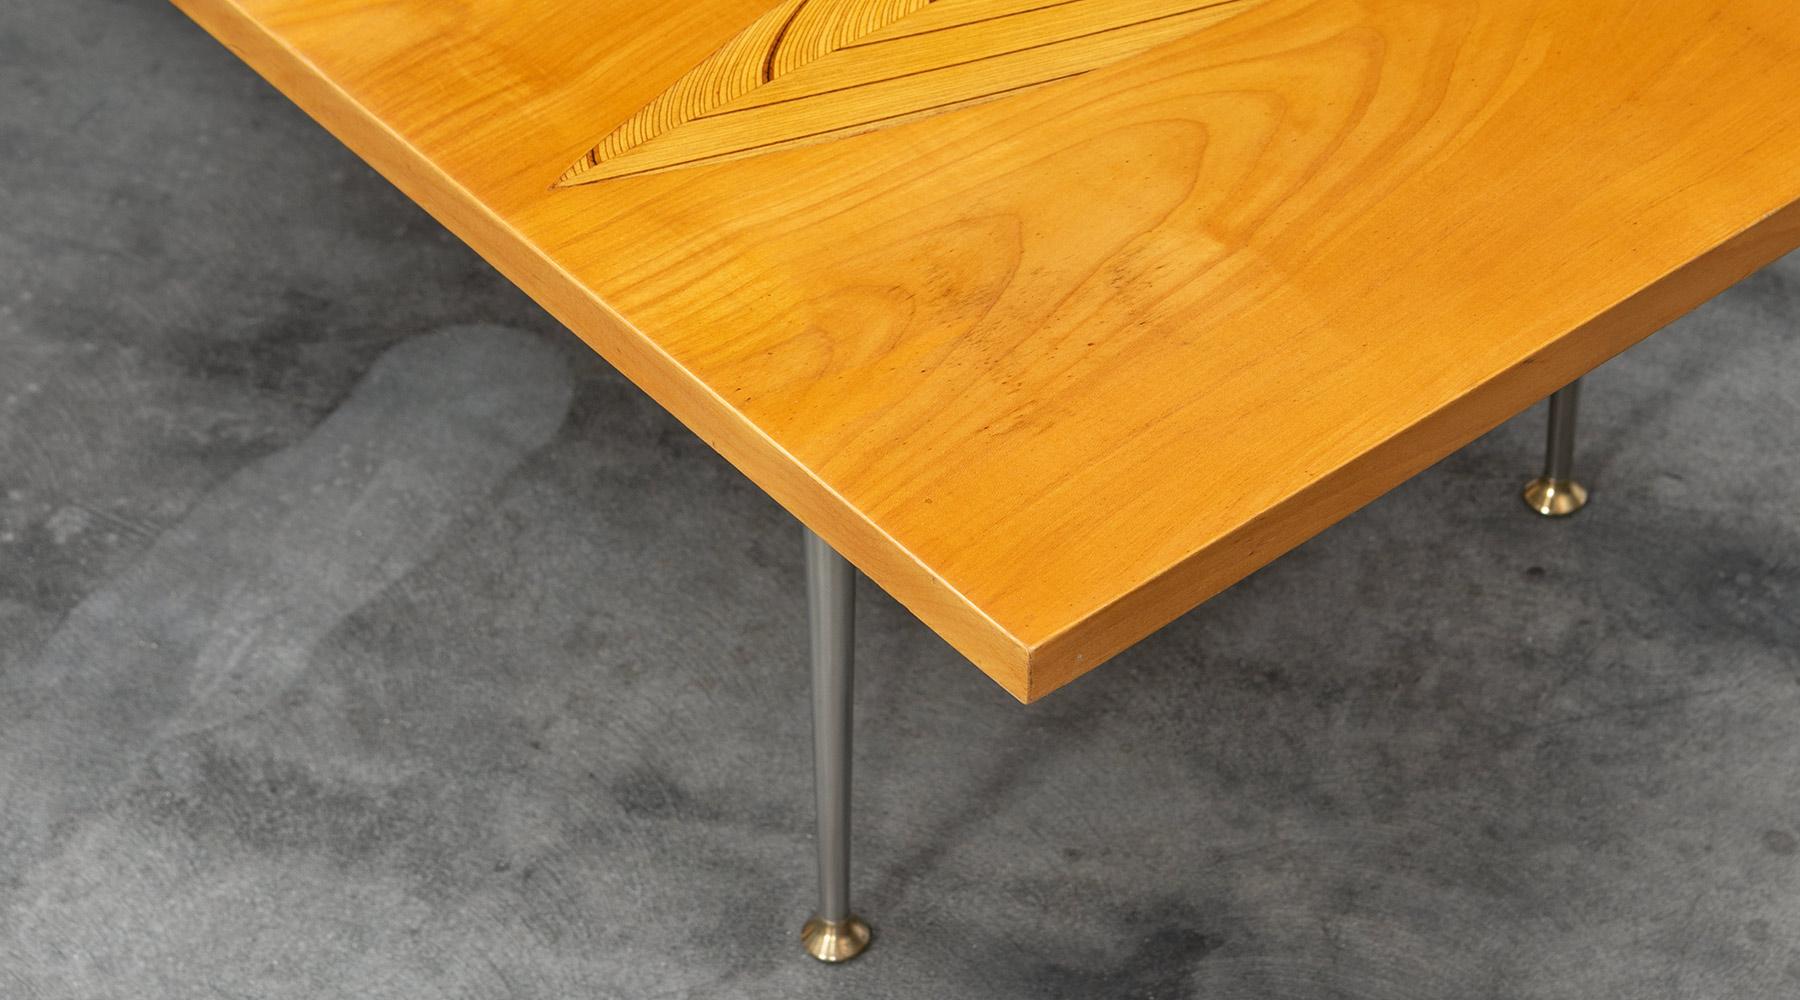 1950s Brown Wooden Coffee Table by Tapio Wirkkala 'd' For Sale 2